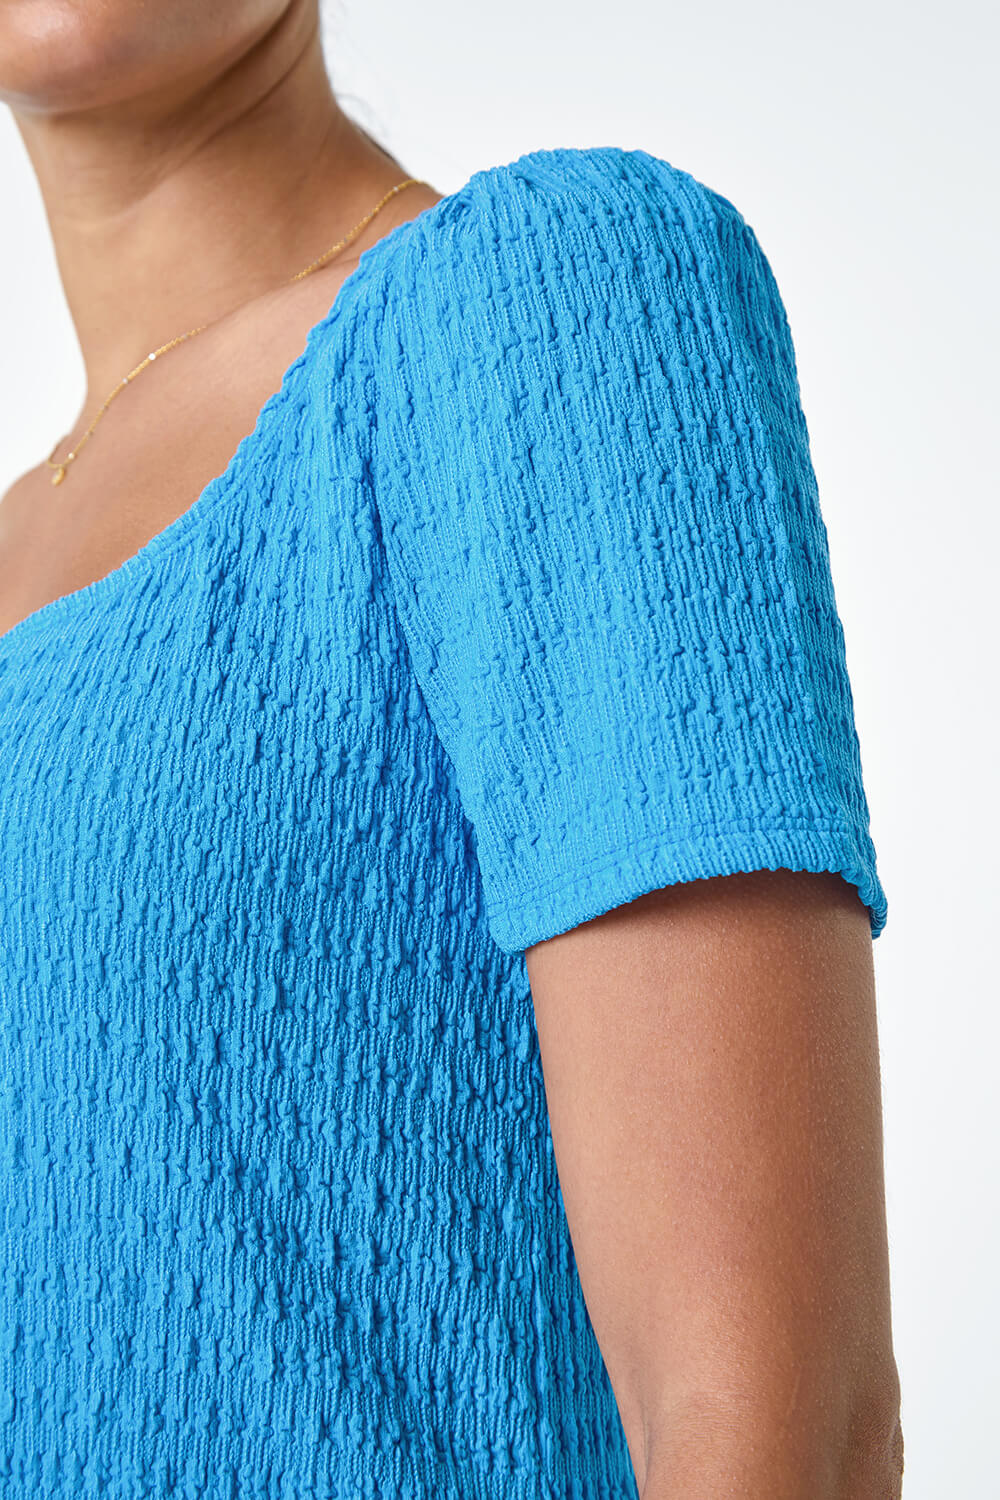 Turquoise Textured Square Neck Stretch Top, Image 5 of 5